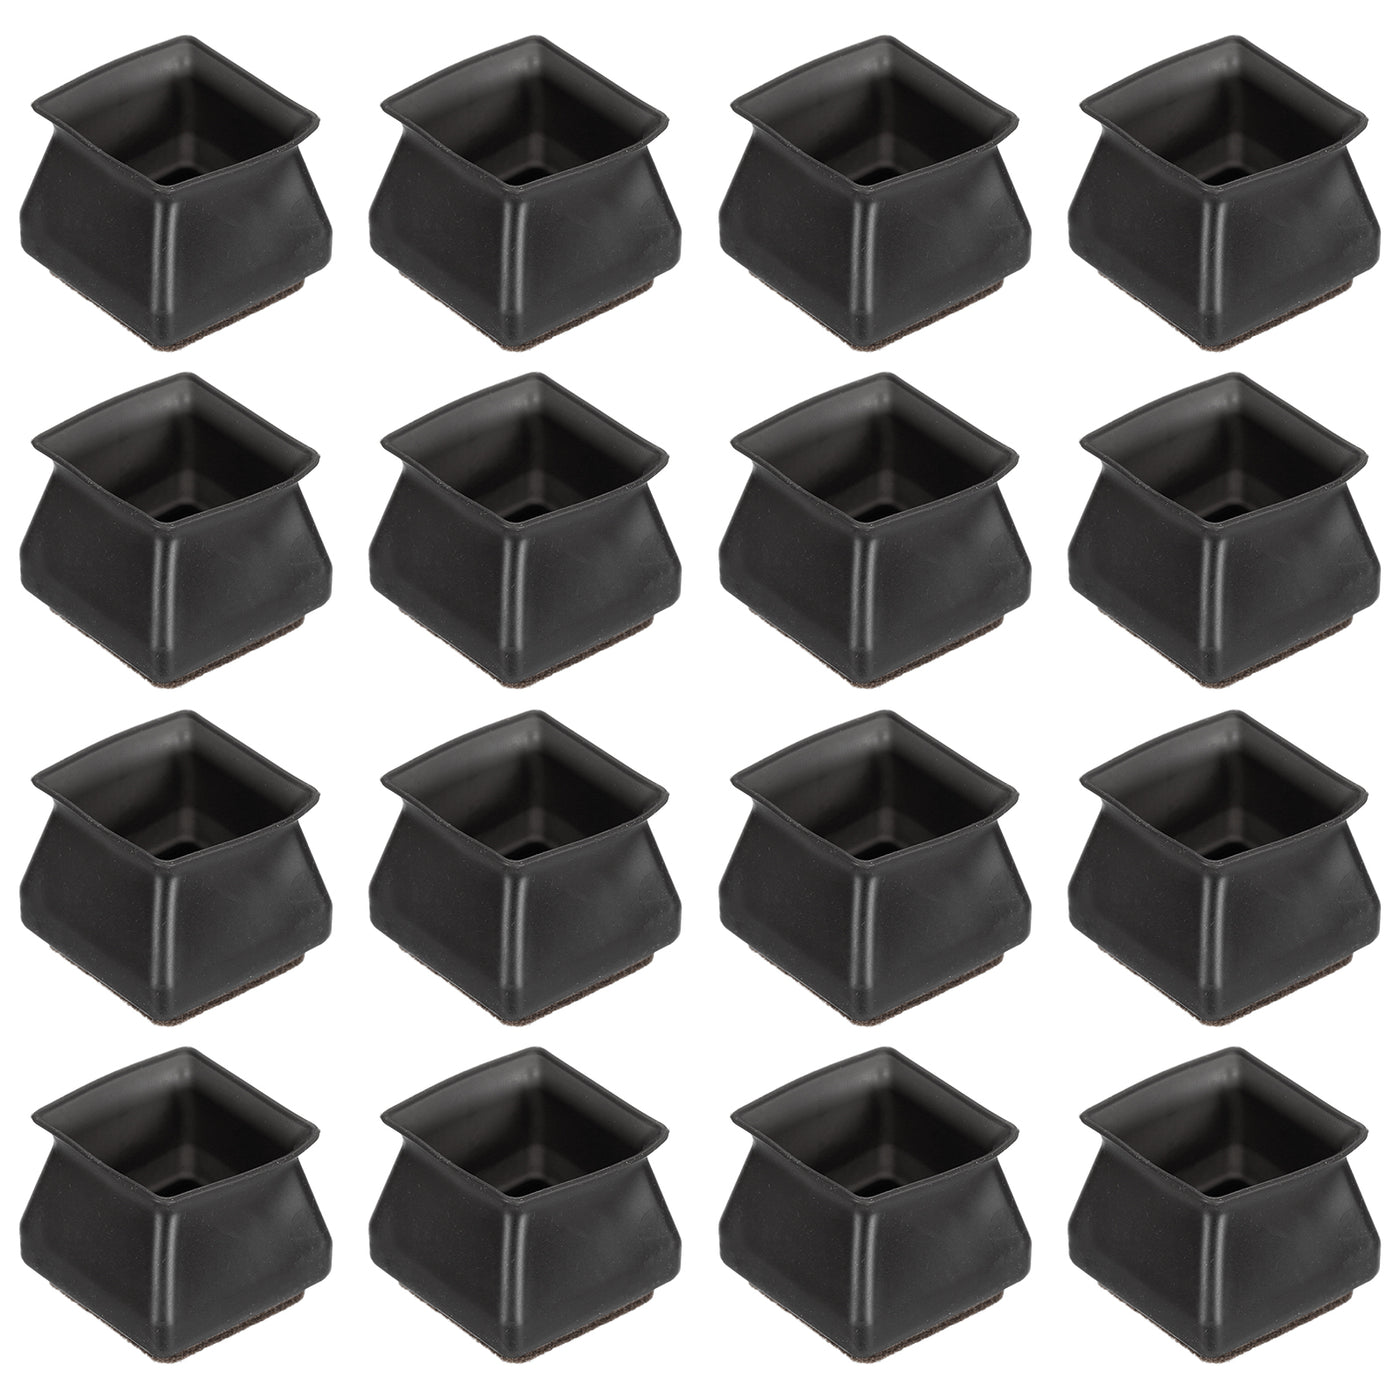 uxcell Uxcell Chair Leg Floor Protectors, 16Pcs 40mm/ 1.57" Silicone & Felt Chair Leg Cover Caps for Hardwood Floors (Black)